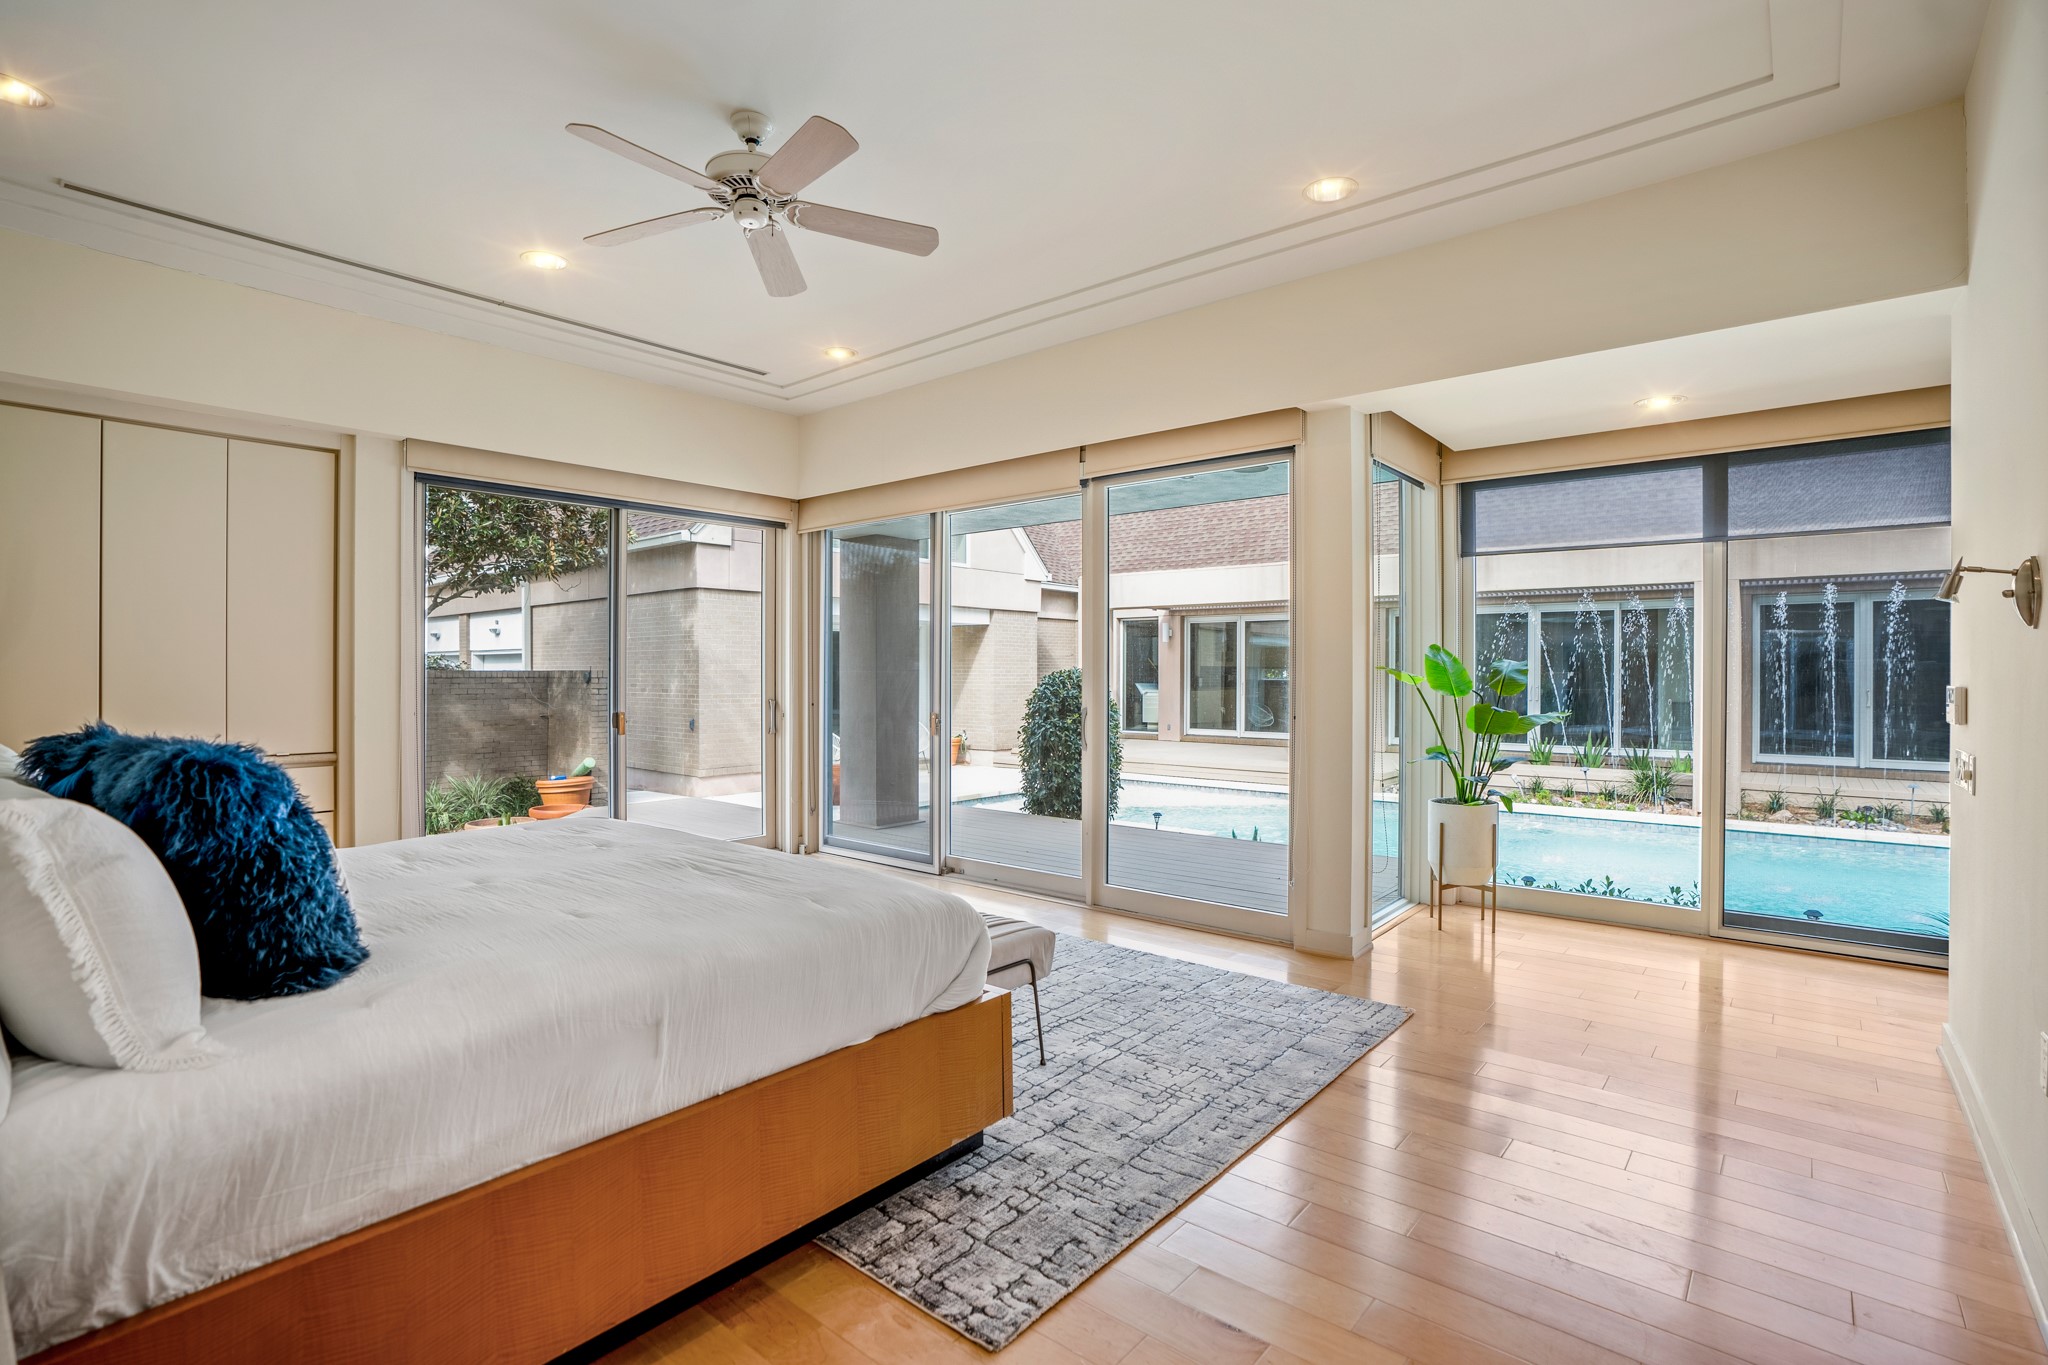 Welcome into your primary bedroom, with sliding glass doors inviting you outside to your oasis.